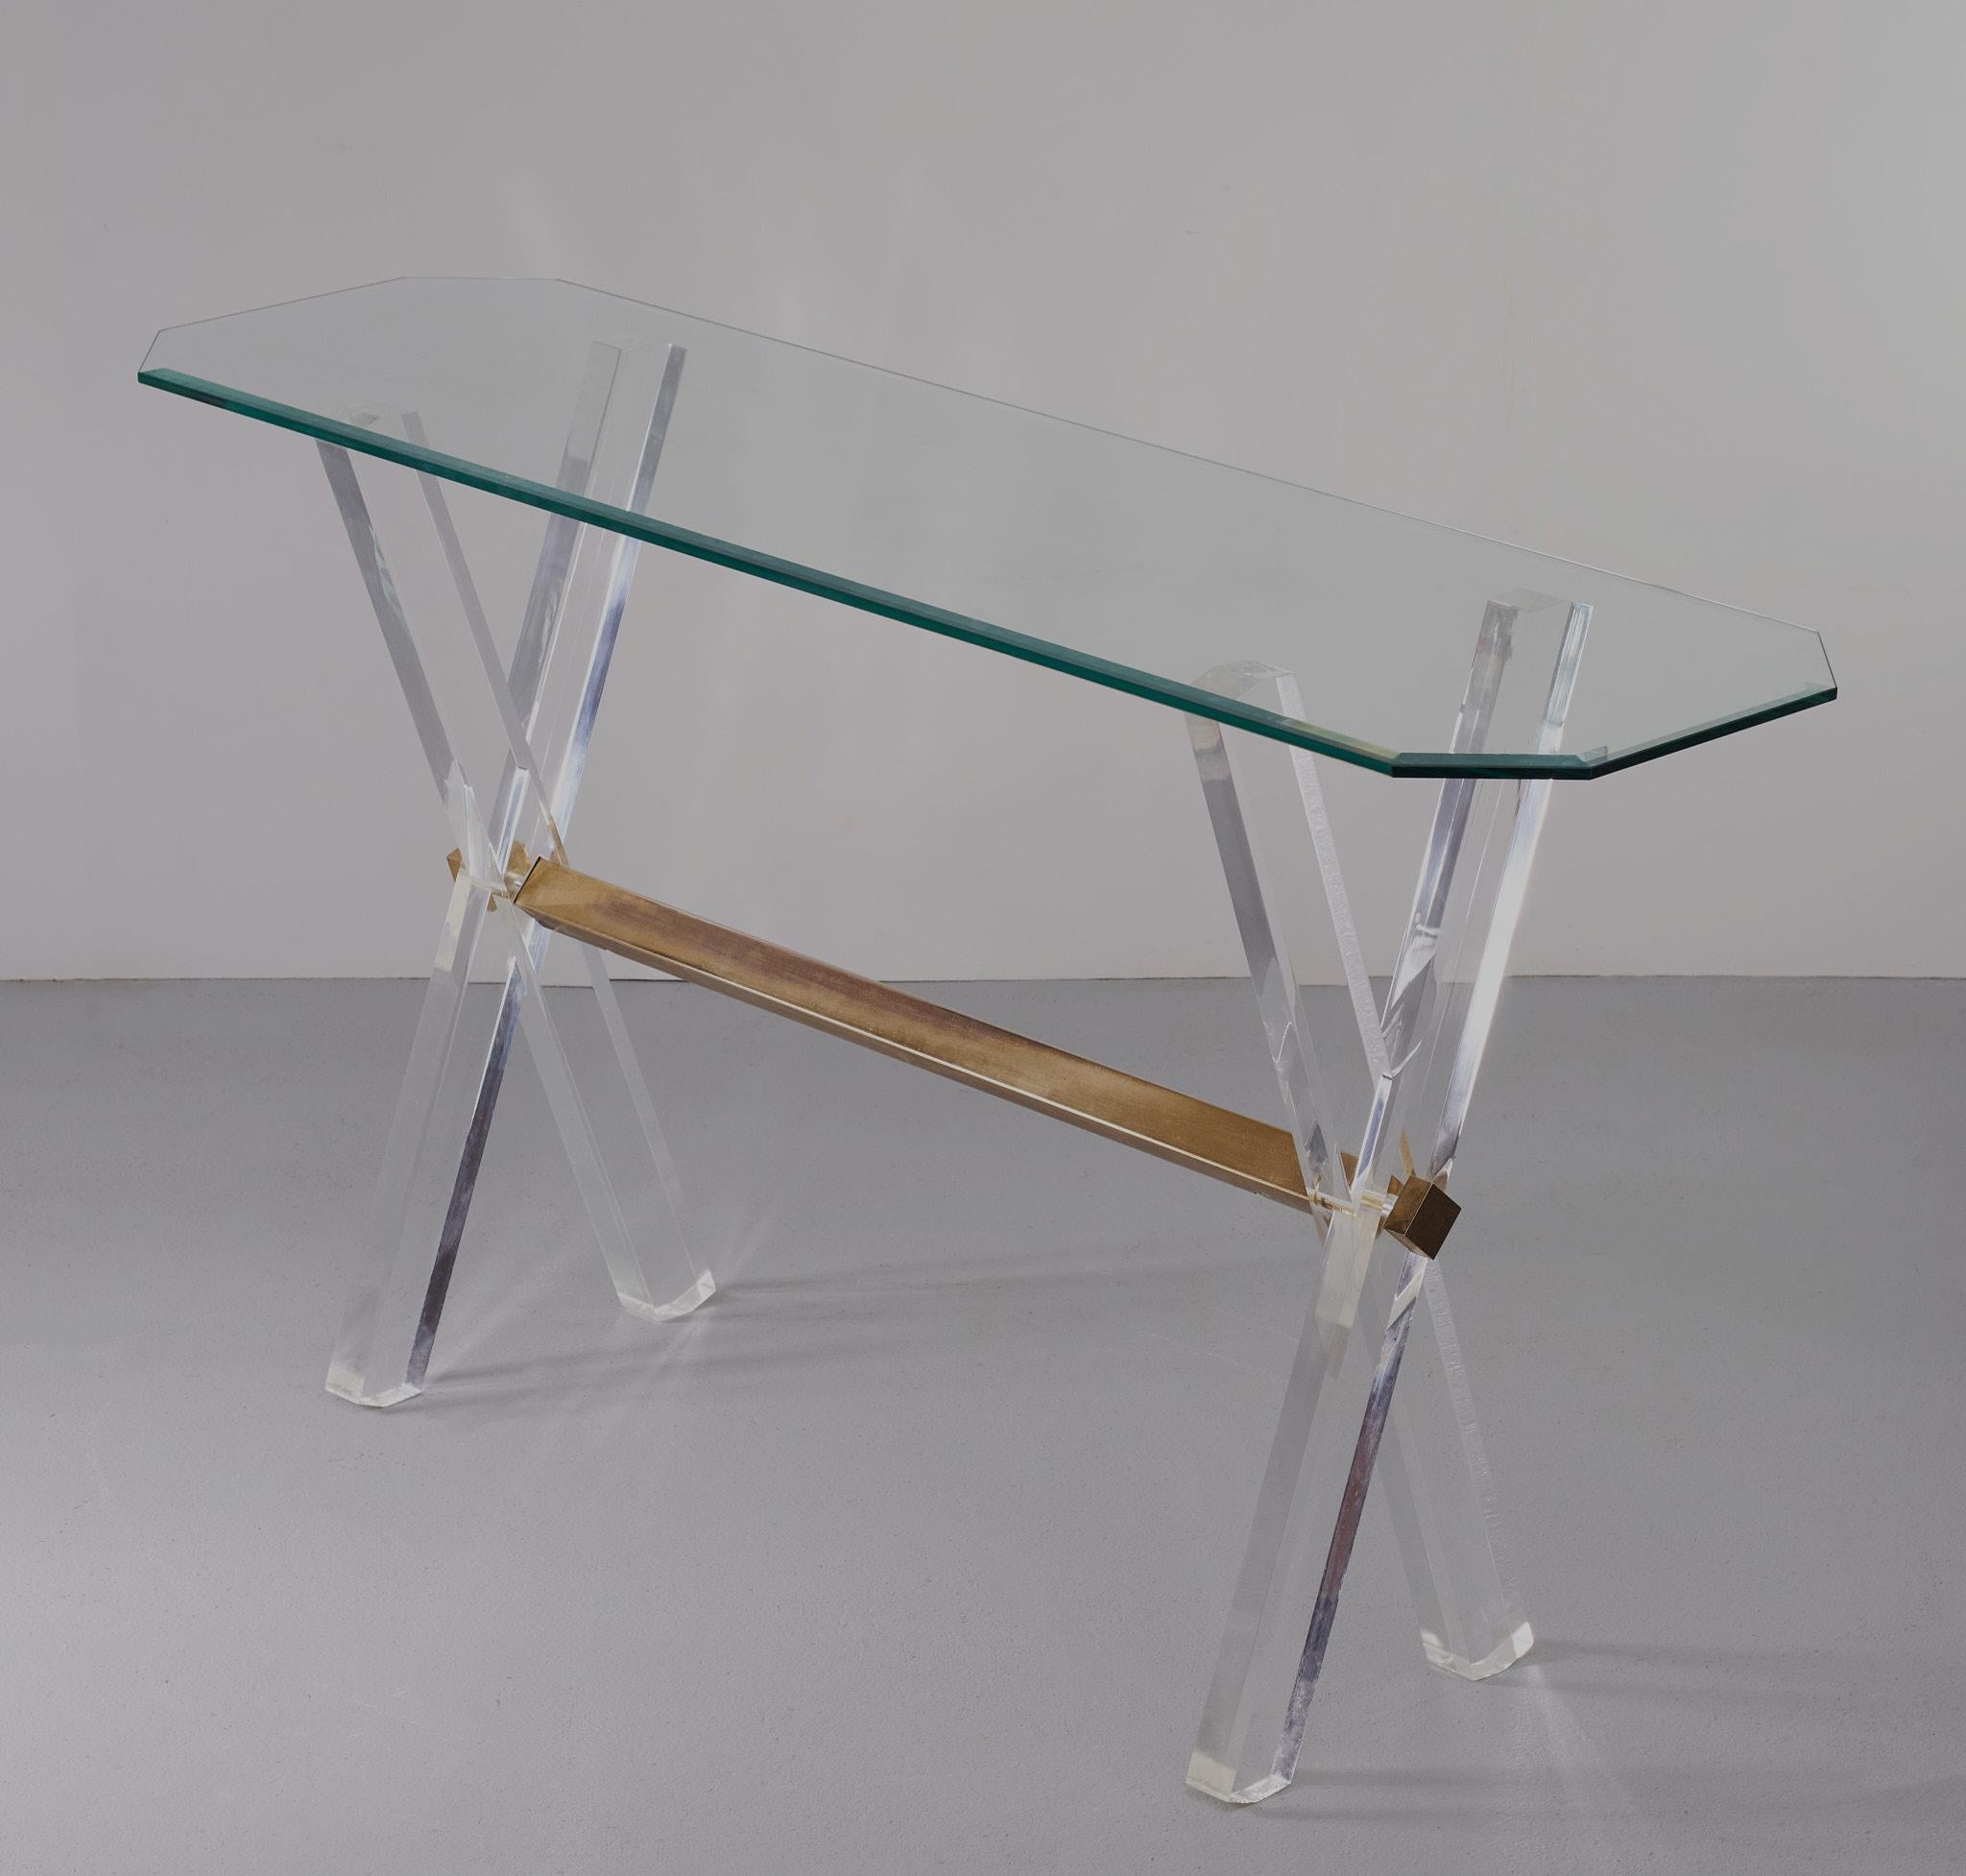 Very nice x frame Console table Lucite base connect it by a Brass 
Bar. Beveled Glass top. Hollywood Regency in style.
Small damage on one side of the leg. ''See photo ''. Otherwise in very 
Good condition.